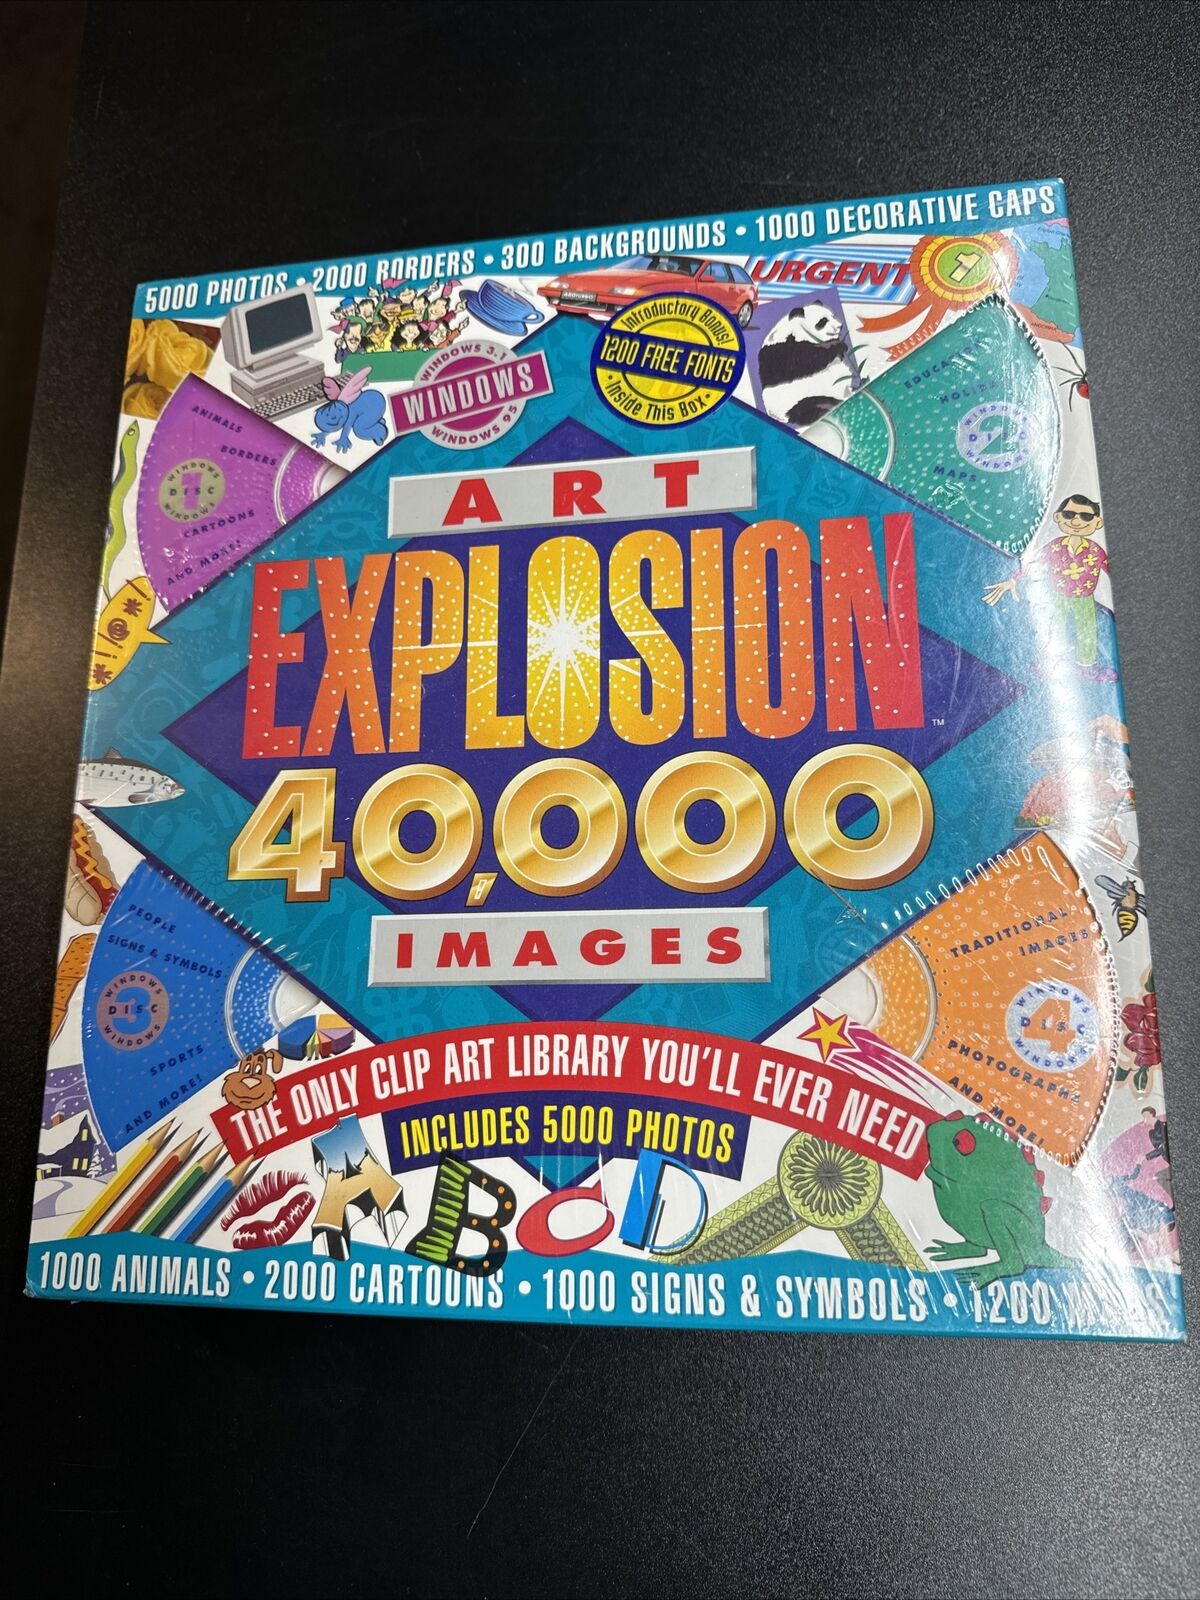 NOS ART EXPLOSION 40,000 Images Clip Art by Nova 1990s Throwback Newsletters